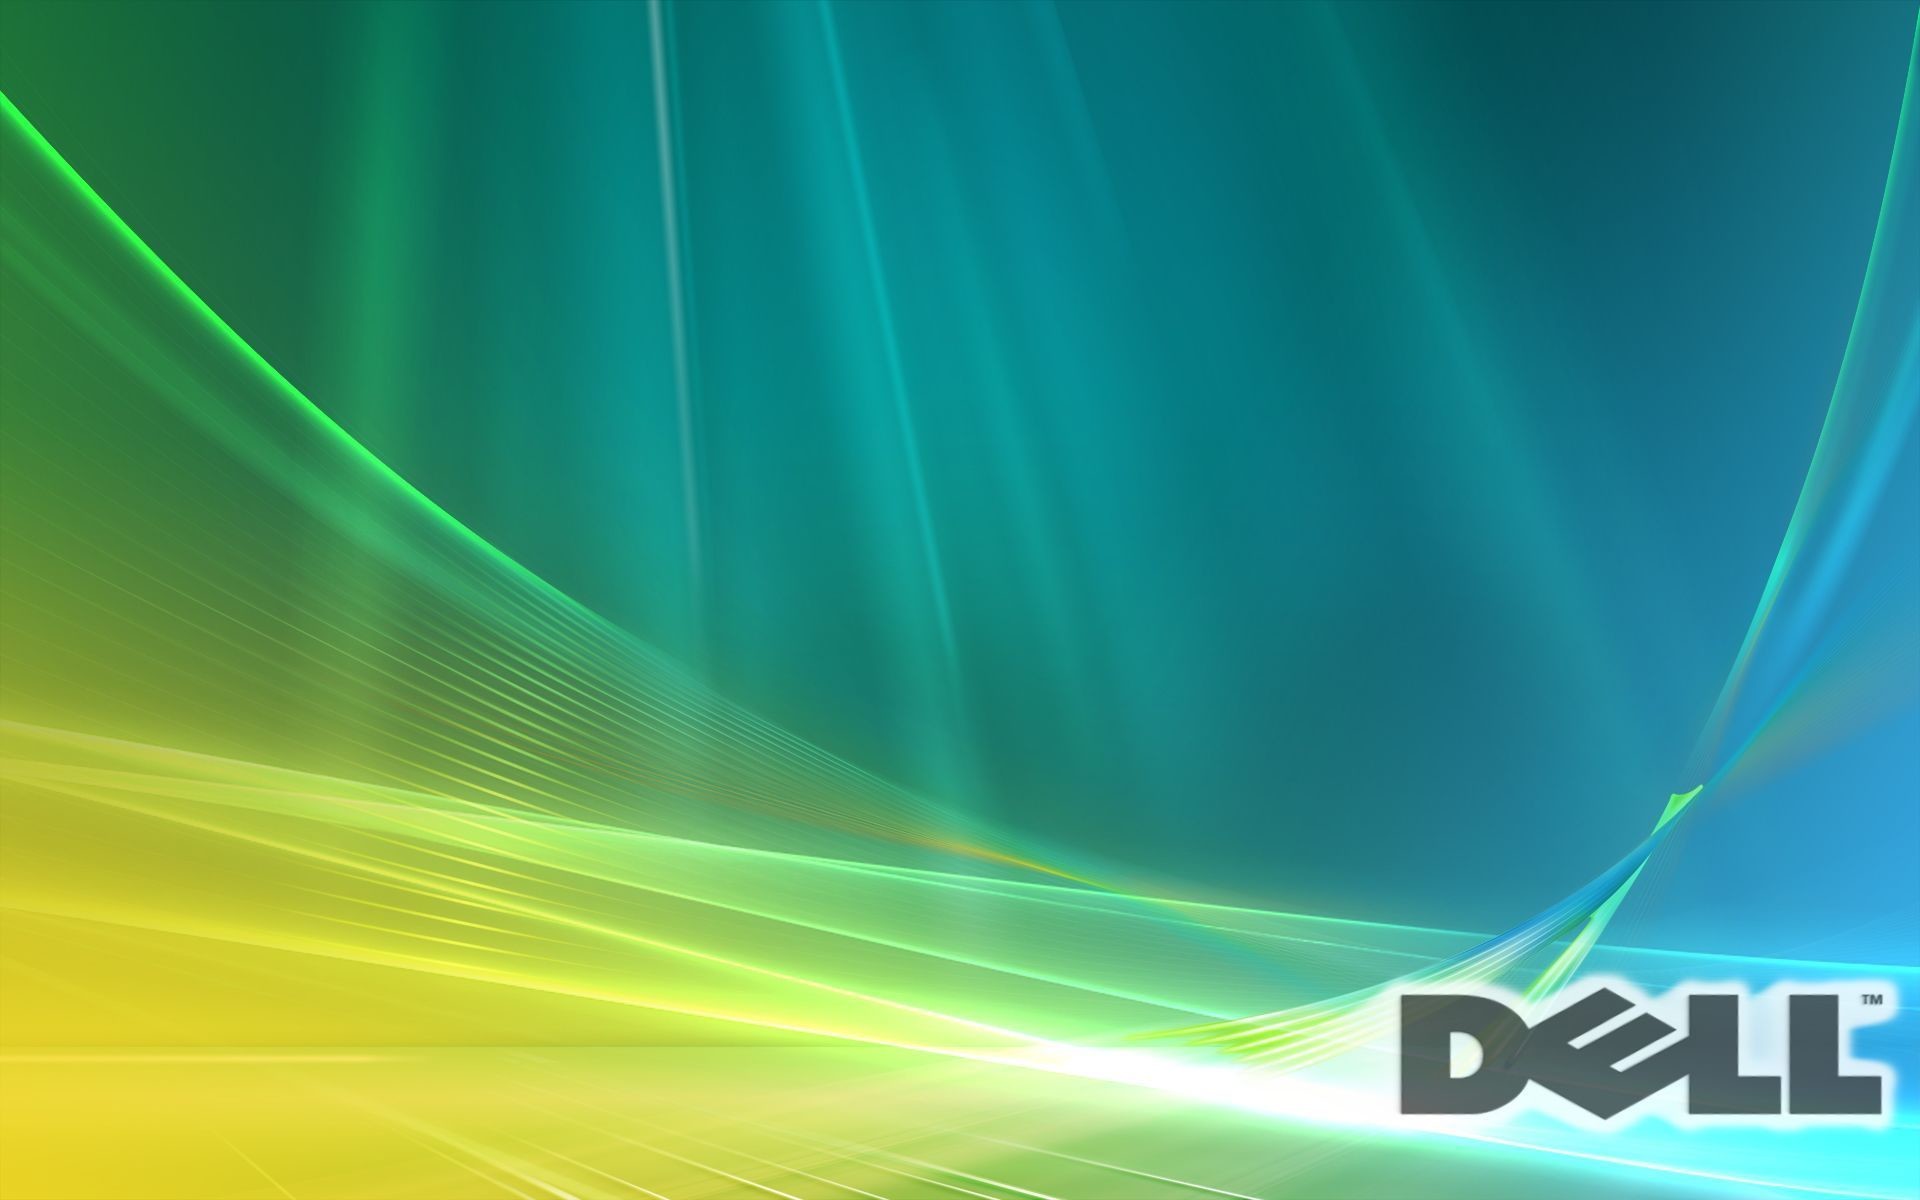 1920x1200 Wallpapers Dell 